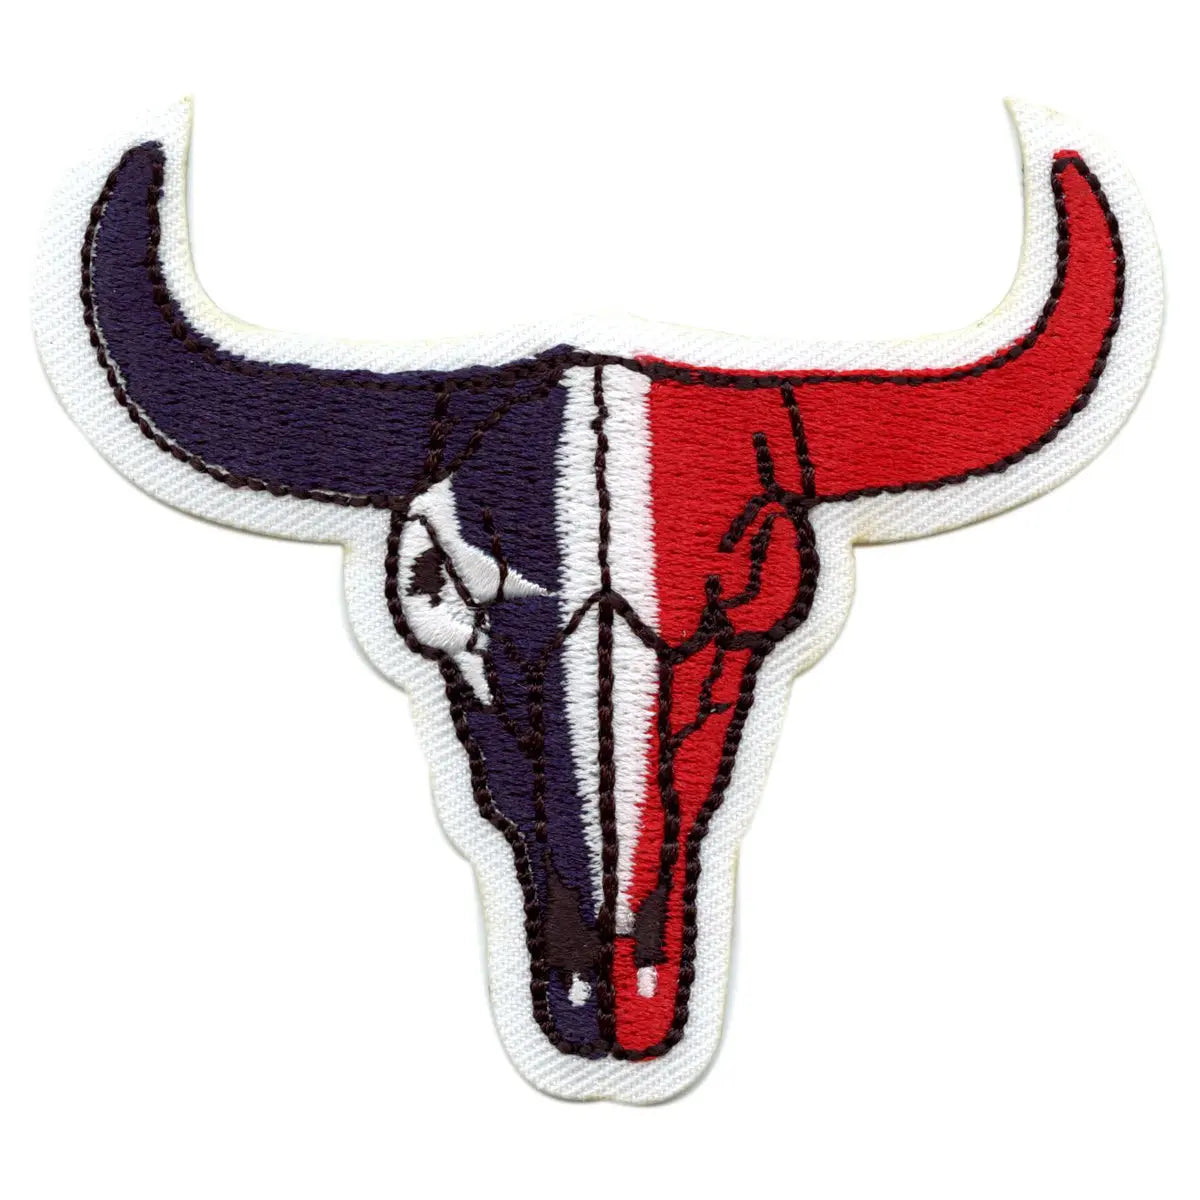 Texas Flag Longhorn Skull Embroidered Iron On Applique Patch 